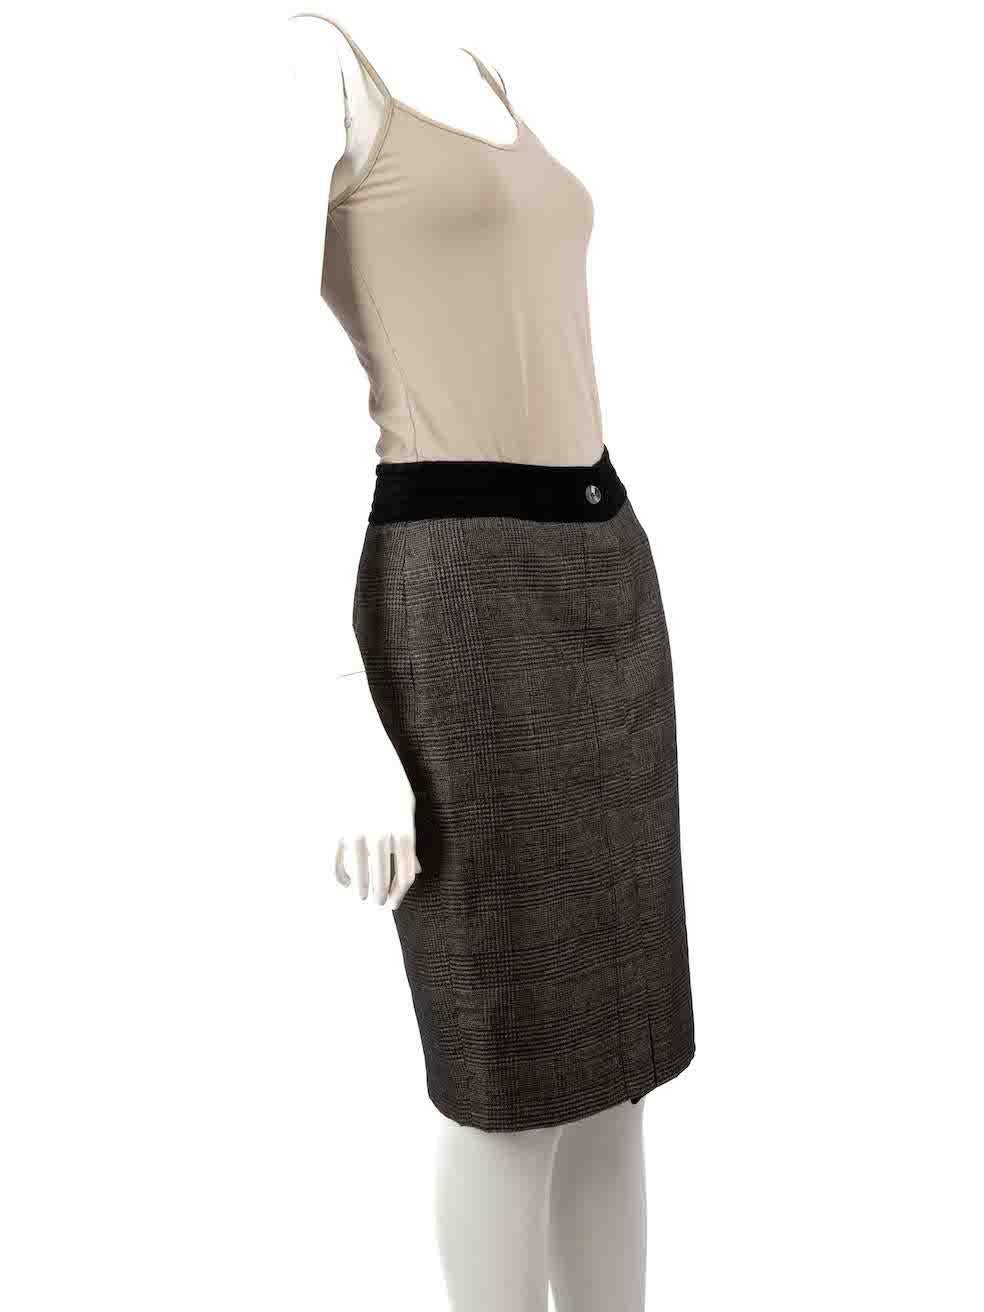 CONDITION is Very good. Hardly any visible wear to skirt is evident on this used Max Mara designer resale item.
 
 
 
 Details
 
 
 Grey
 
 Wool
 
 Pencil skirt
 
 Velvet waistband
 
 Figure hugging fit
 
 Knee length
 
 Button up fastening
 
 
 
 
